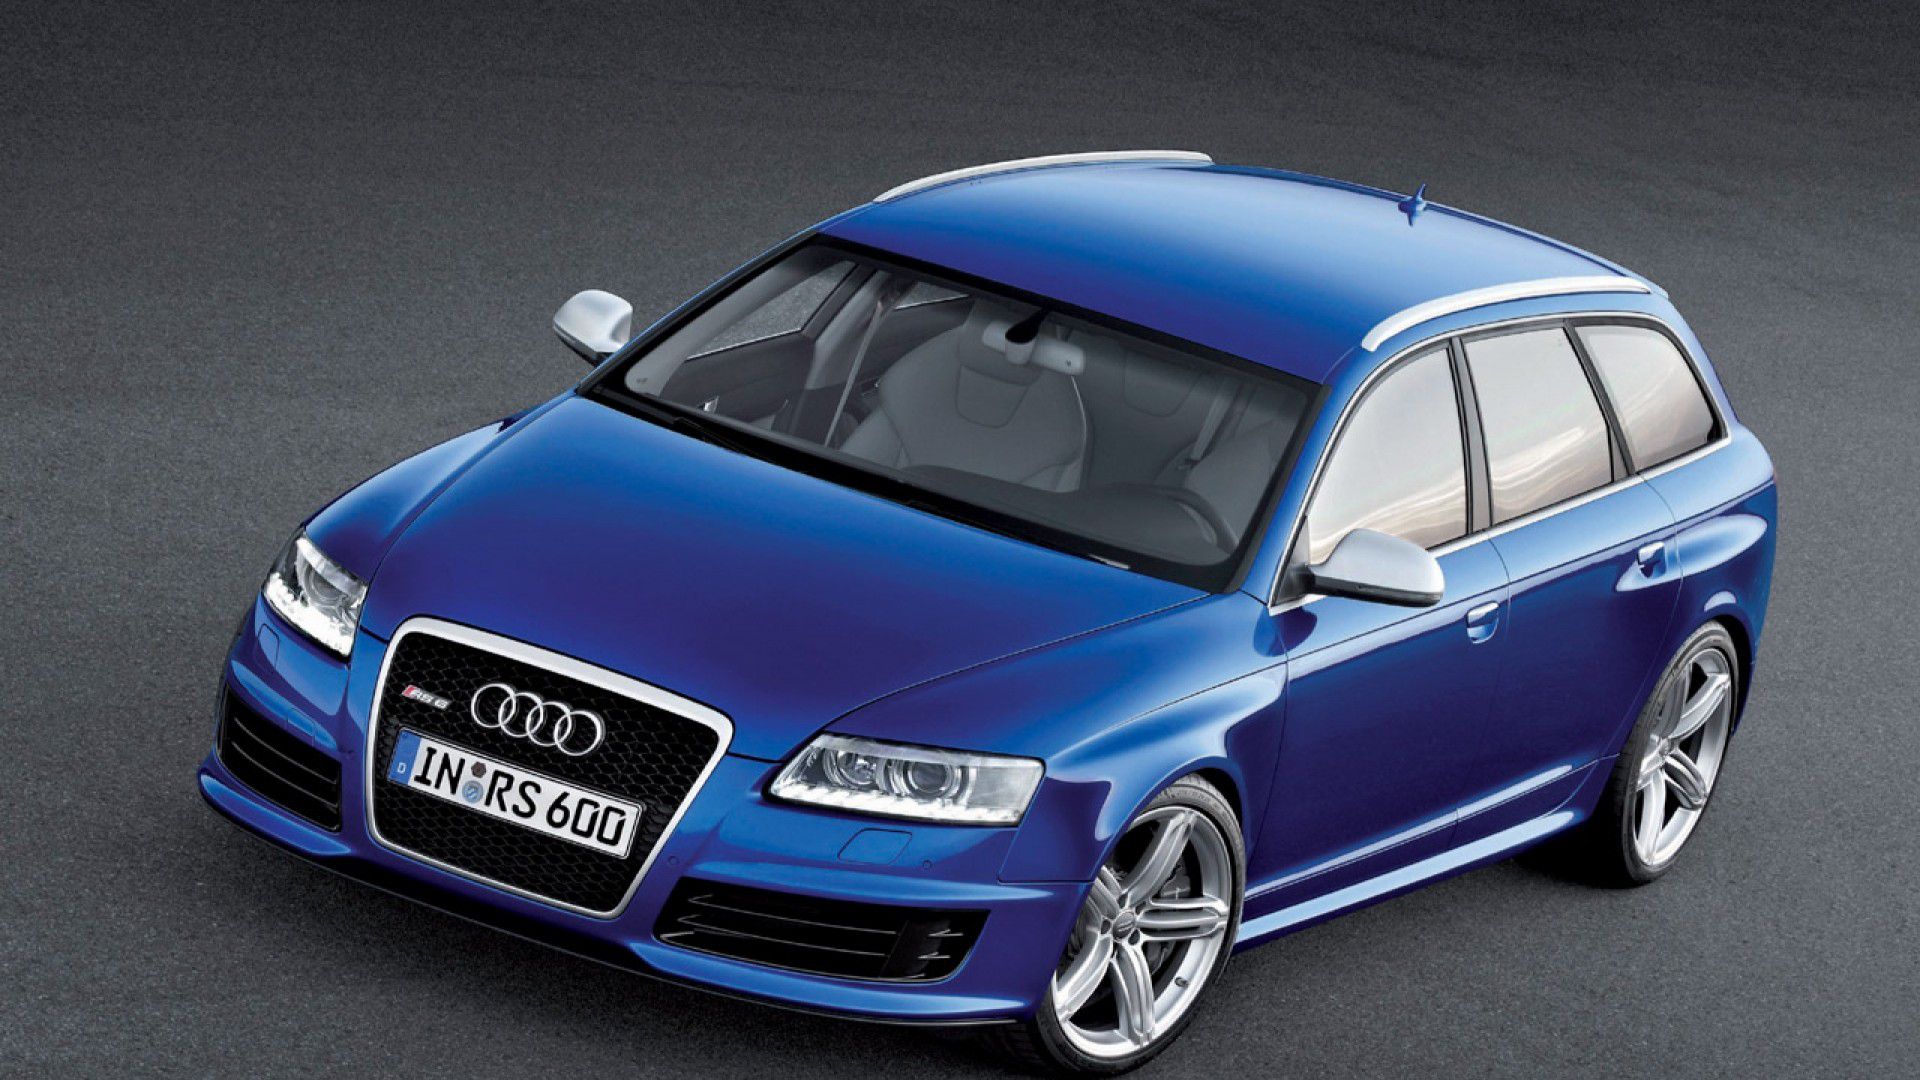 Audi A6 (2008 to 2011)